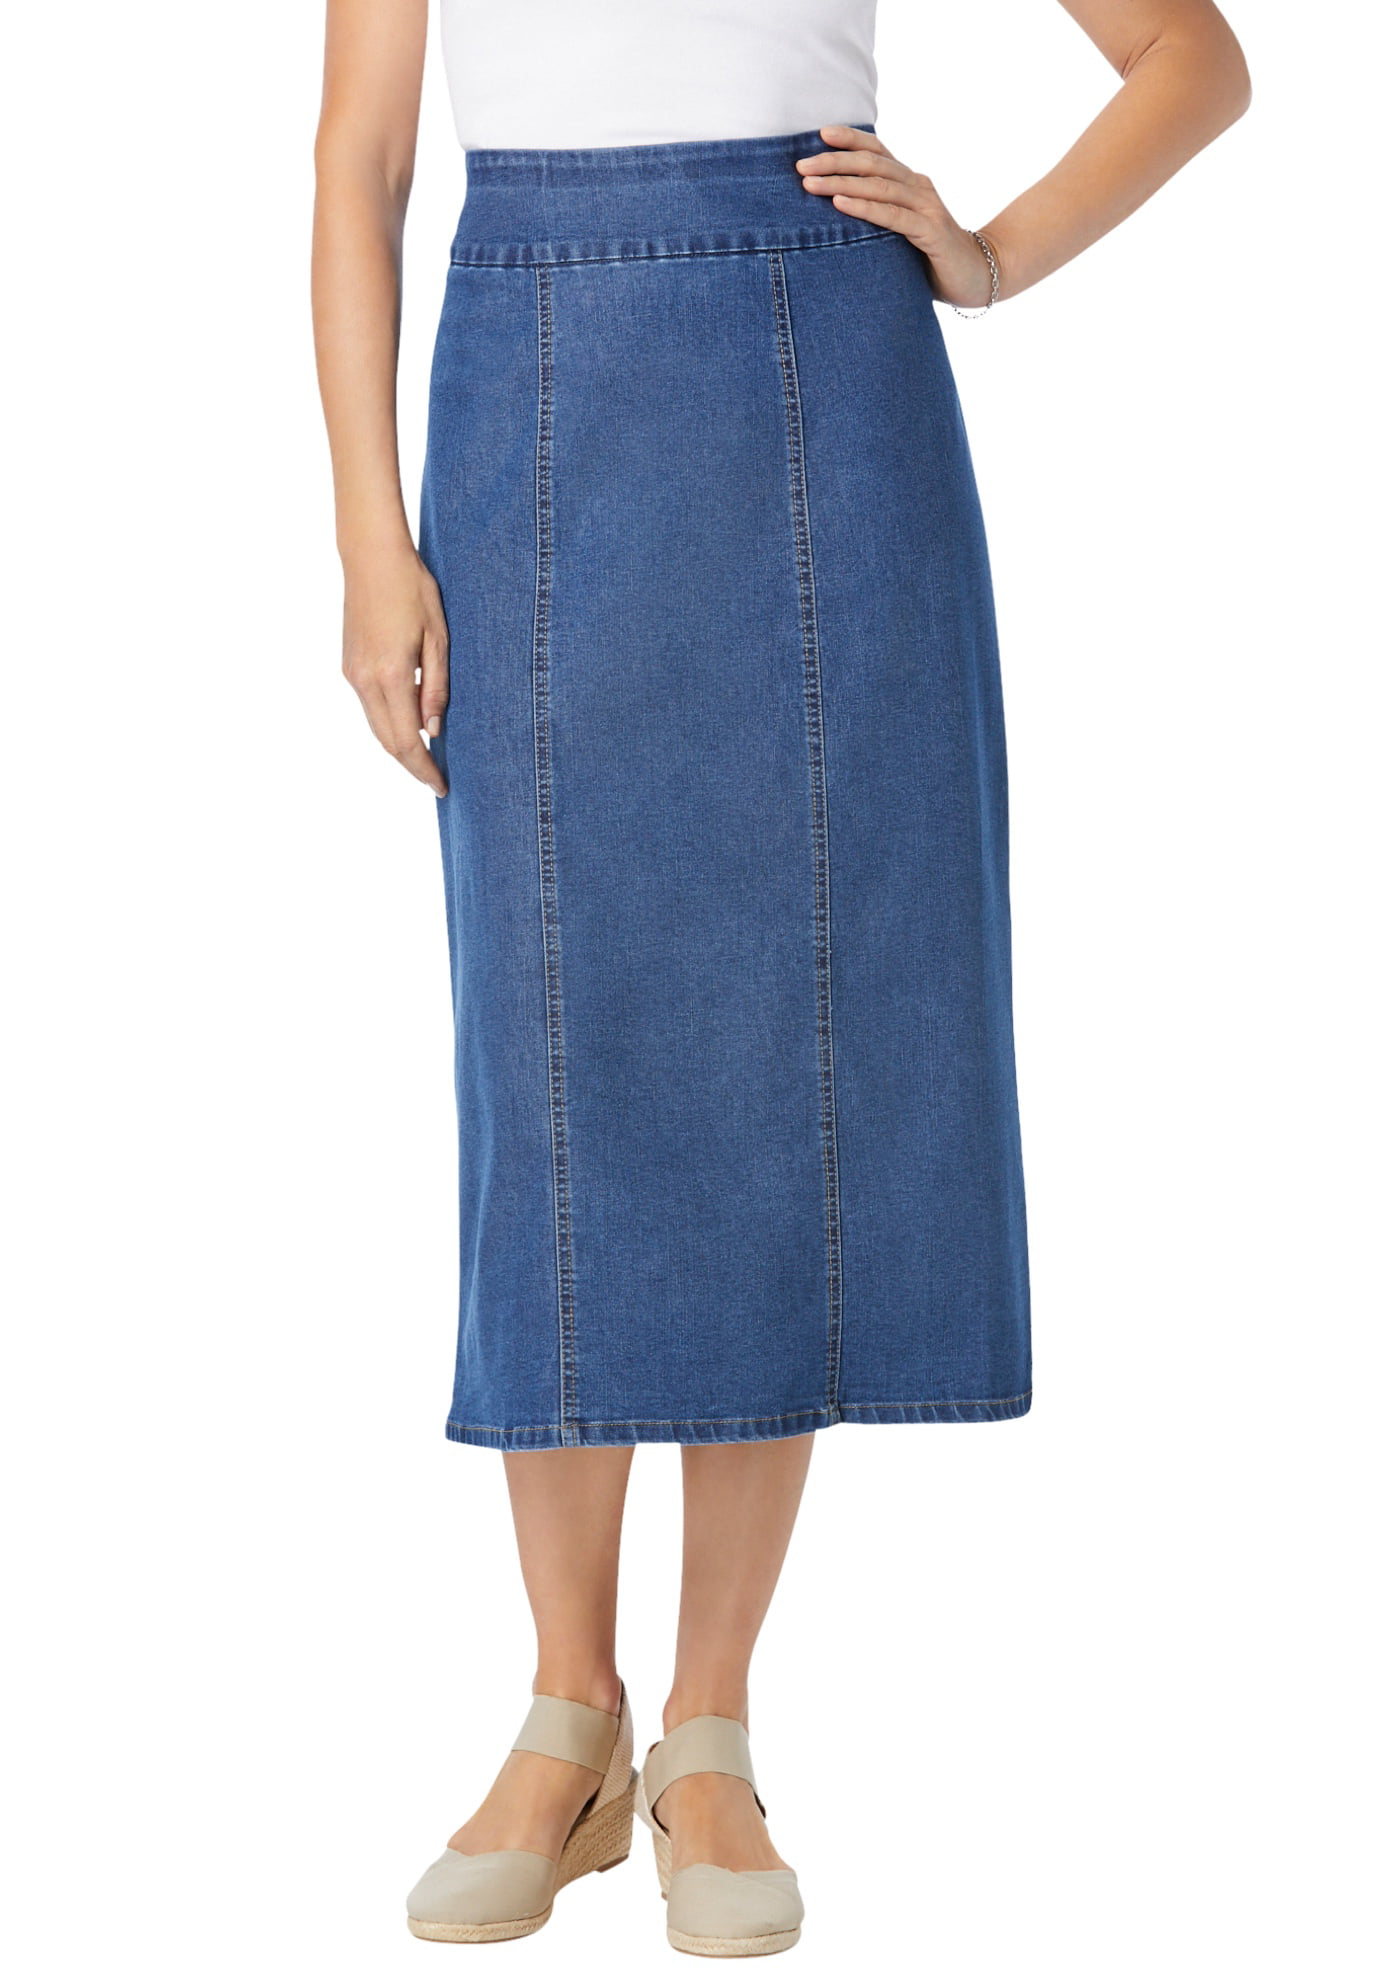 Woman Within - Woman Within Women's Plus Size Pull-On Denim Skirt Skirt ...